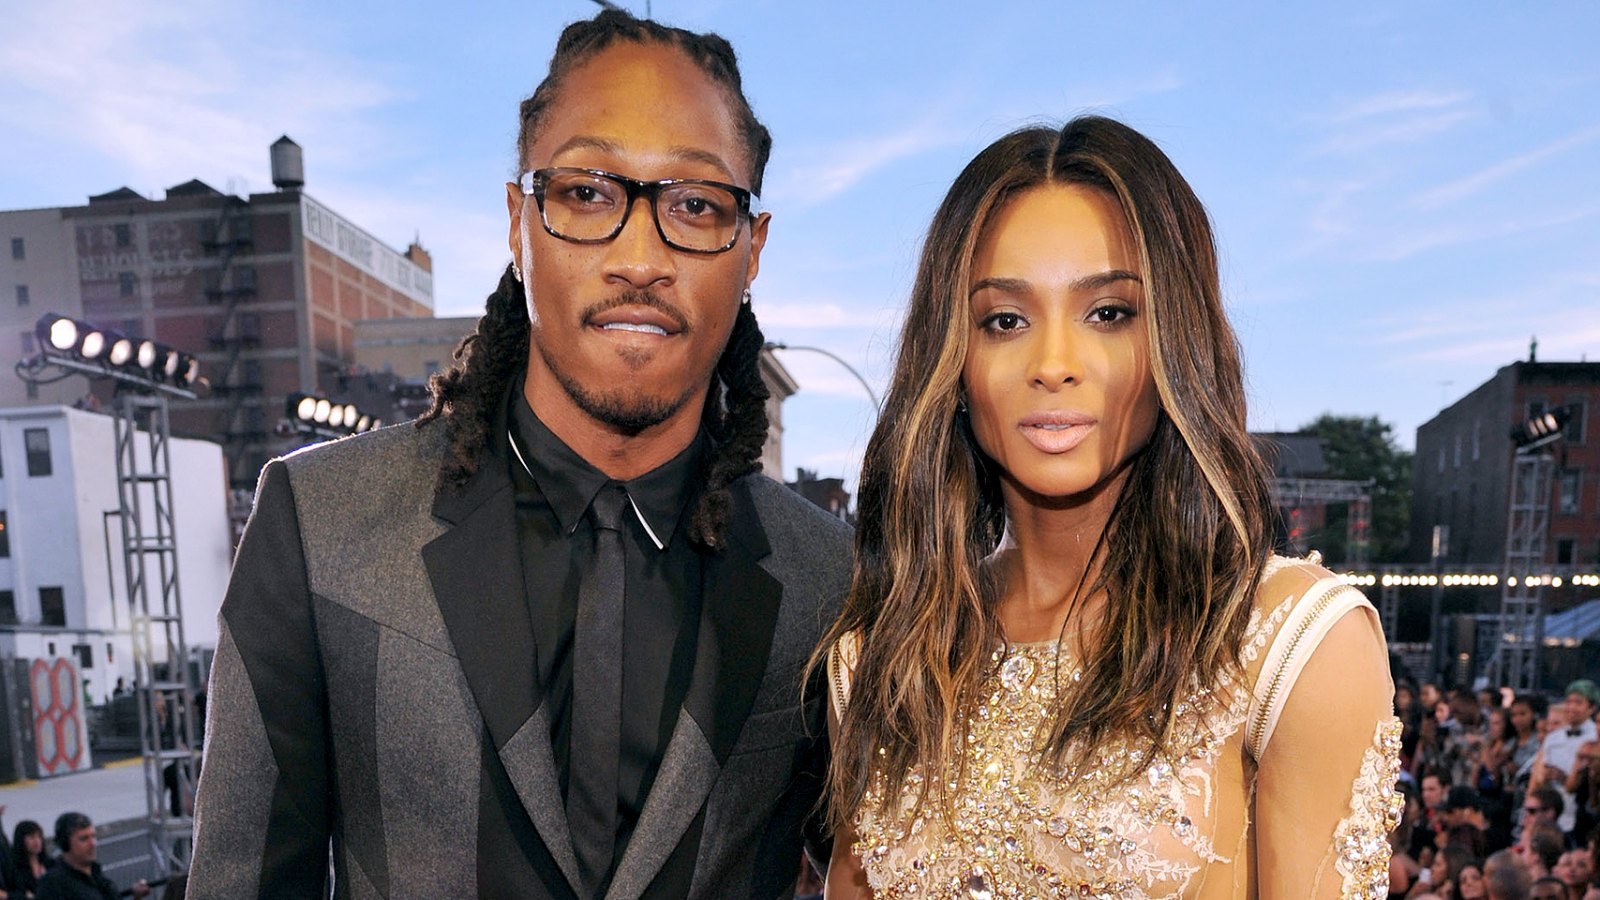 Future and Ciara attend the 2013 MTV Video Music Awards at the Barclays Center on August 25, 2013 in the Brooklyn borough of New York City.